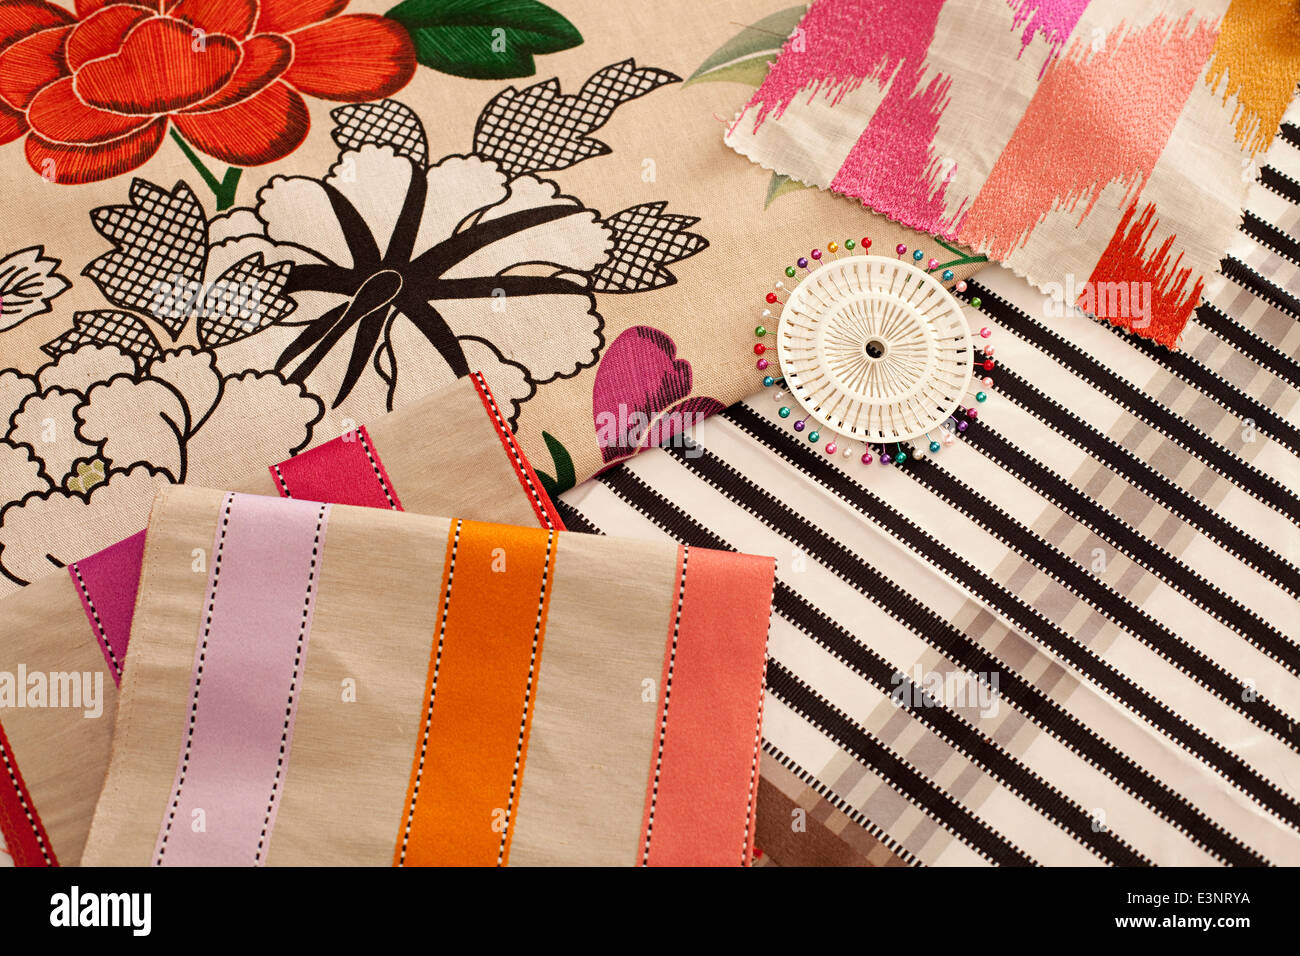 Choosing fabrics. Picture shows swatches of fabric for an interior design project Stock Photo